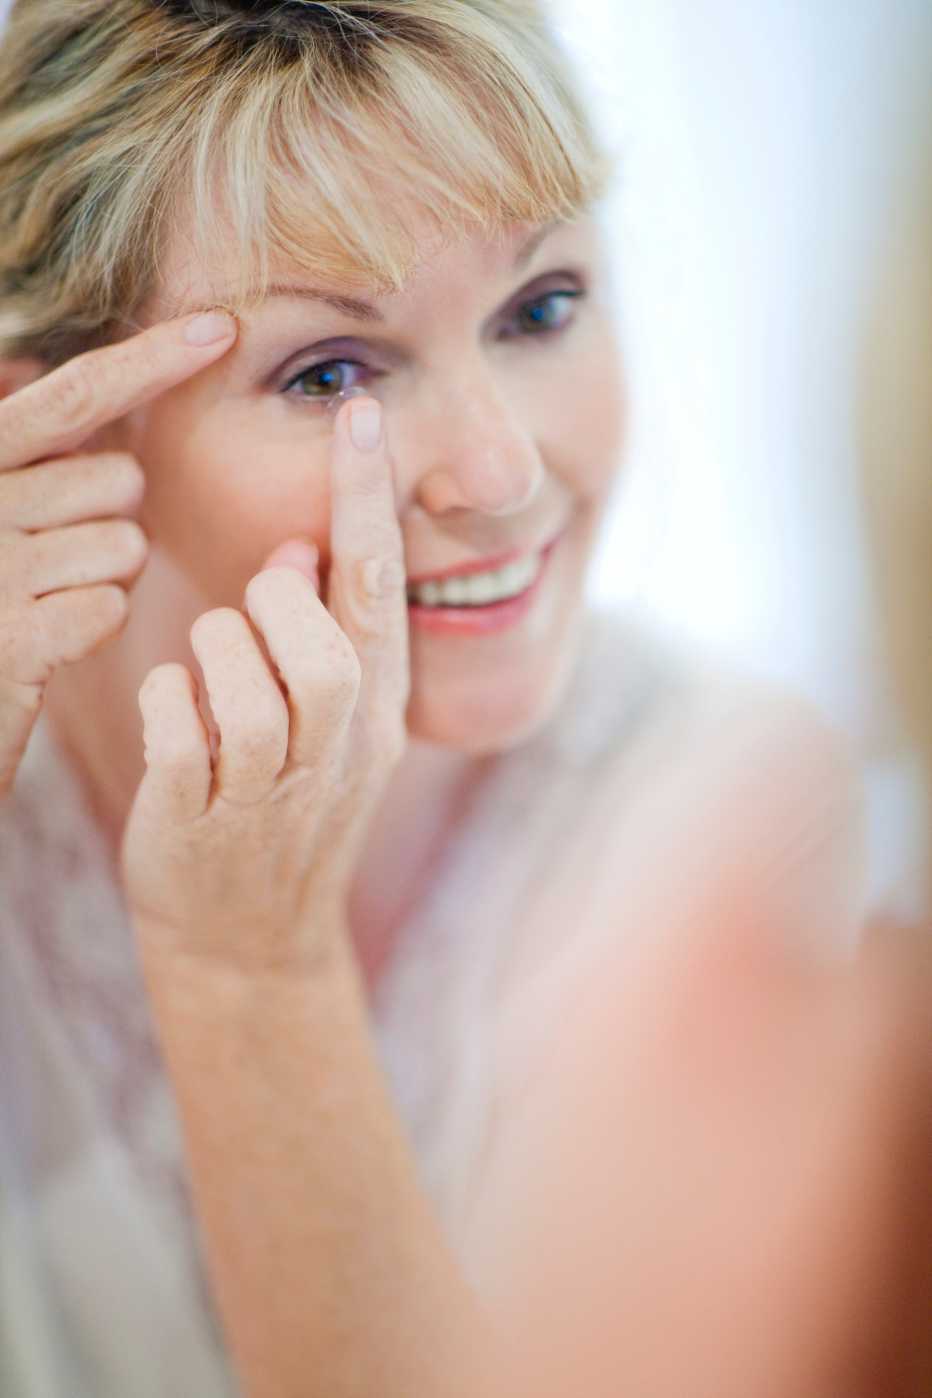 Senior woman looking at her reflection in the mirror while putting in contact lenses.